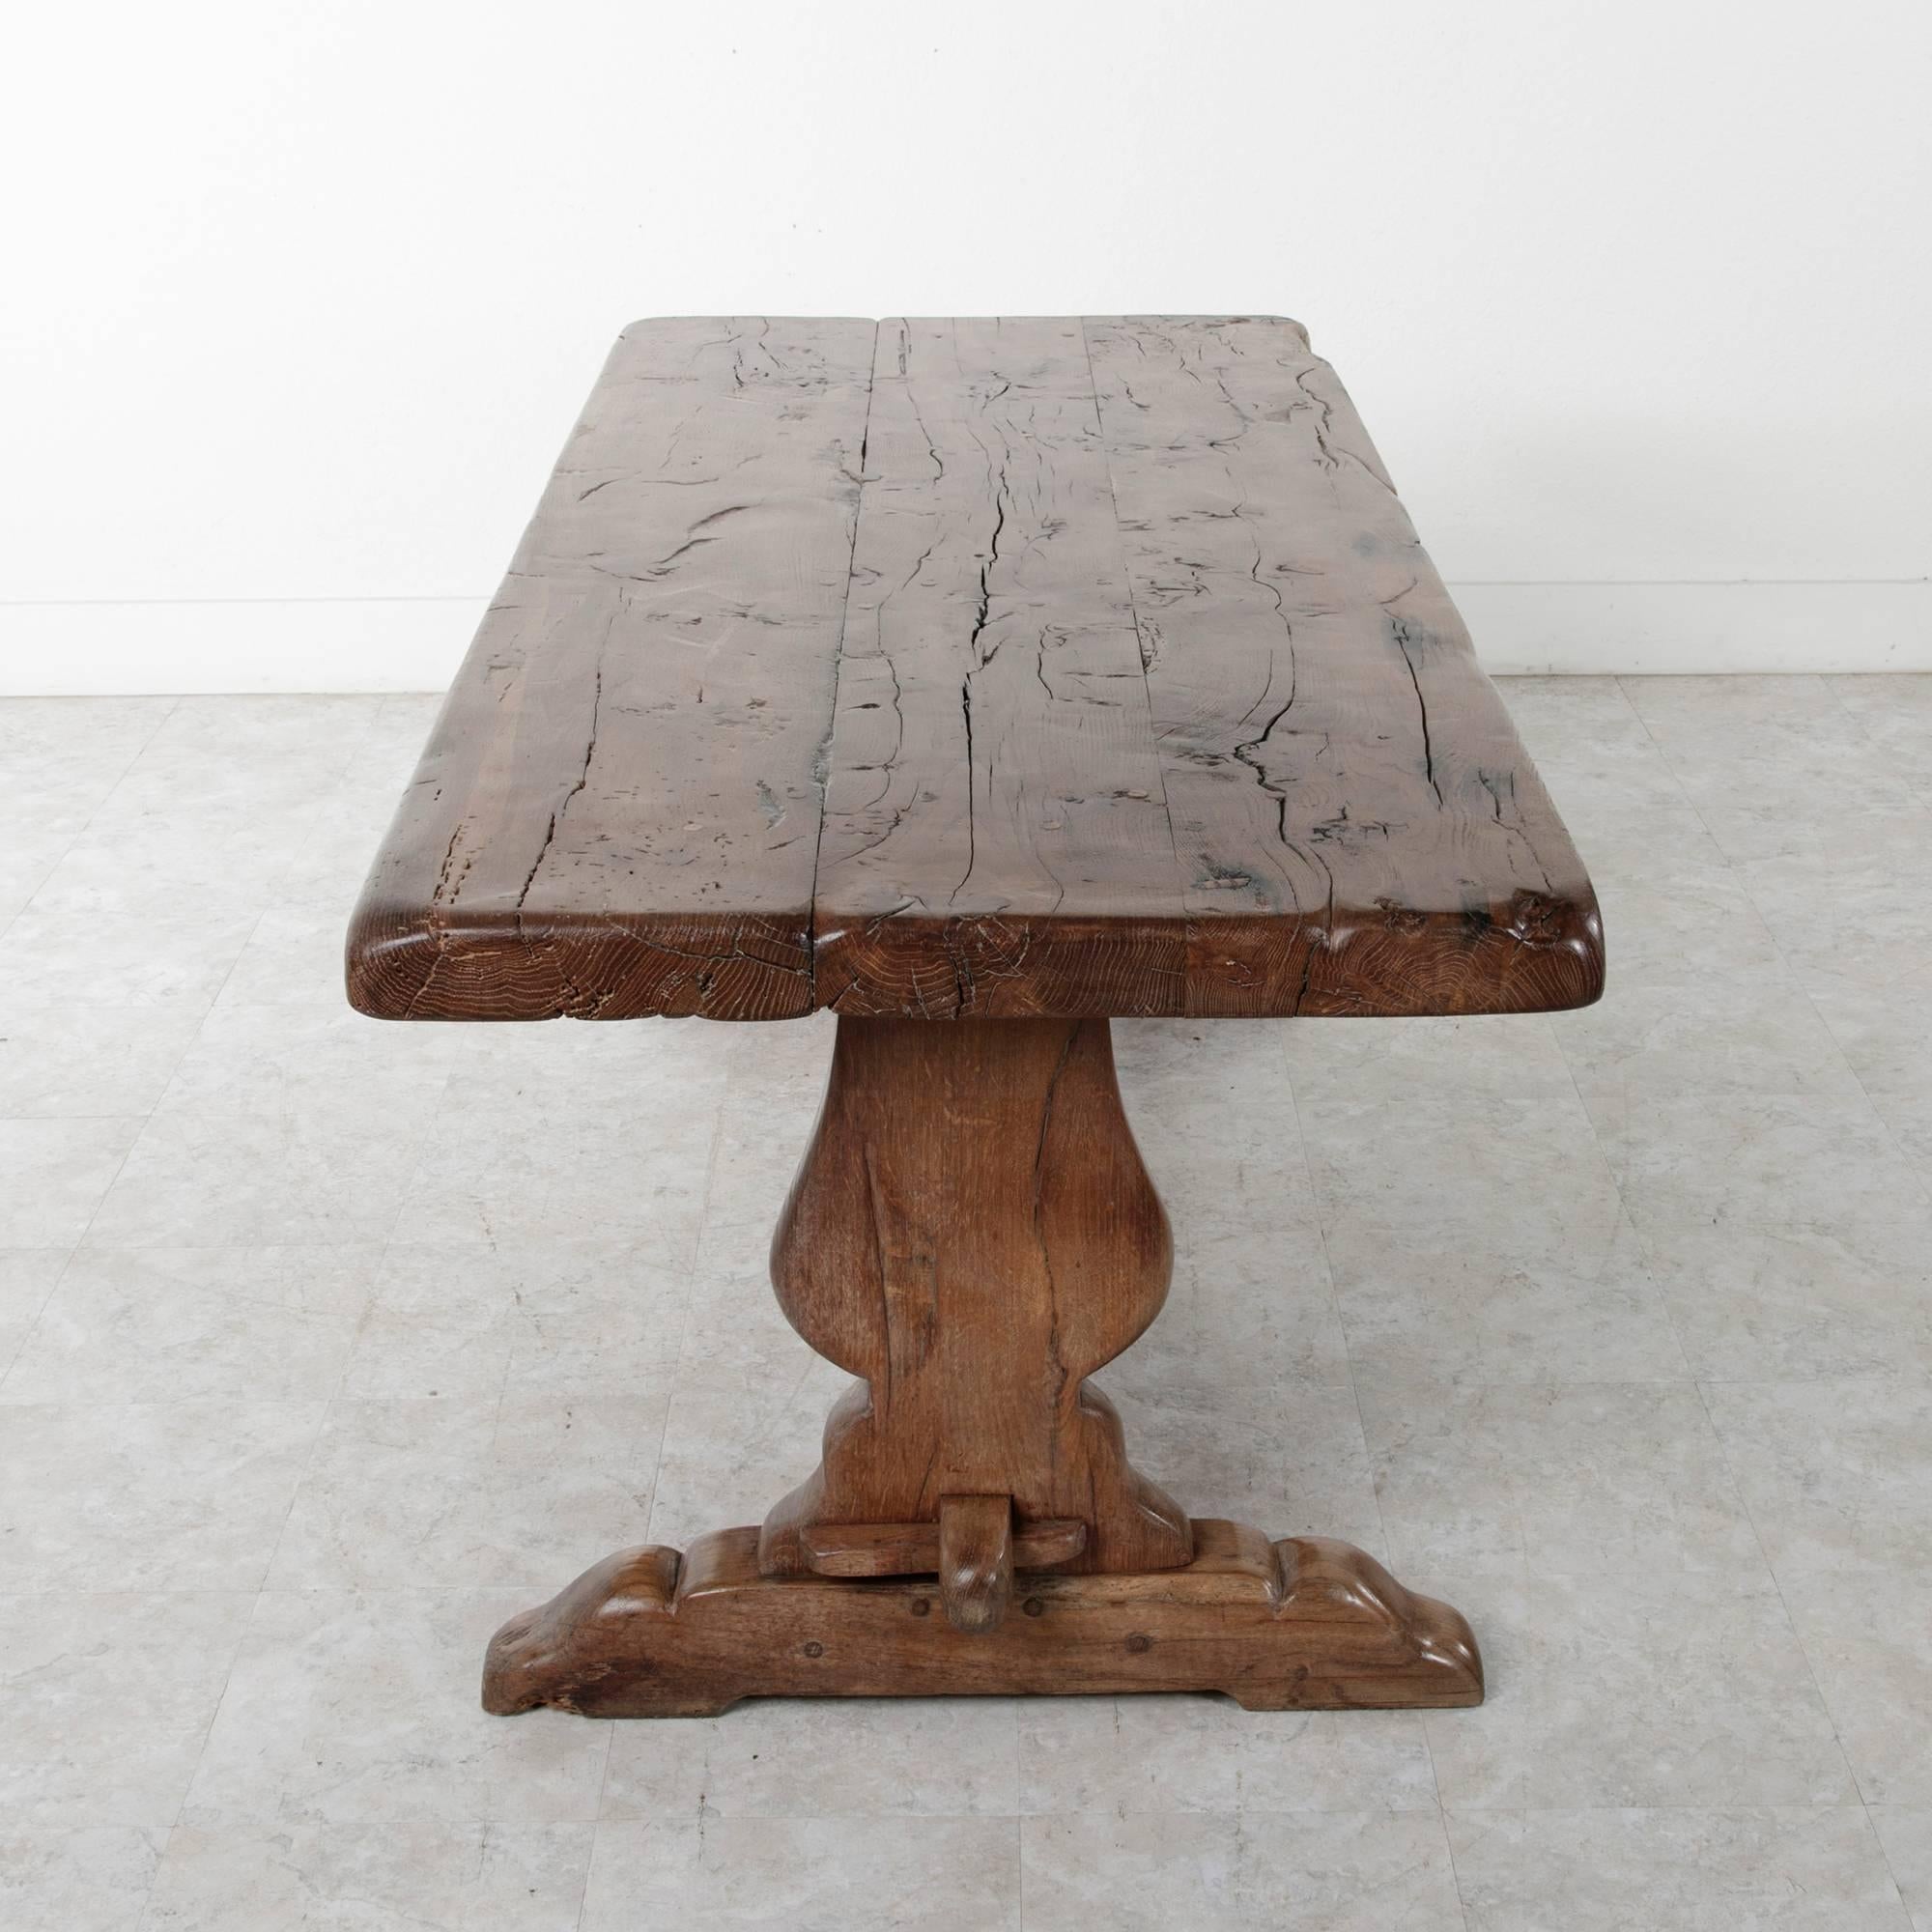 This beautifully aged oak monastery table was constructed from 18th century beams of wood, giving it a spectacular aged feel. Found in Normandy, this table's trestle design allows for two to three seats along each side and one at each end. The top